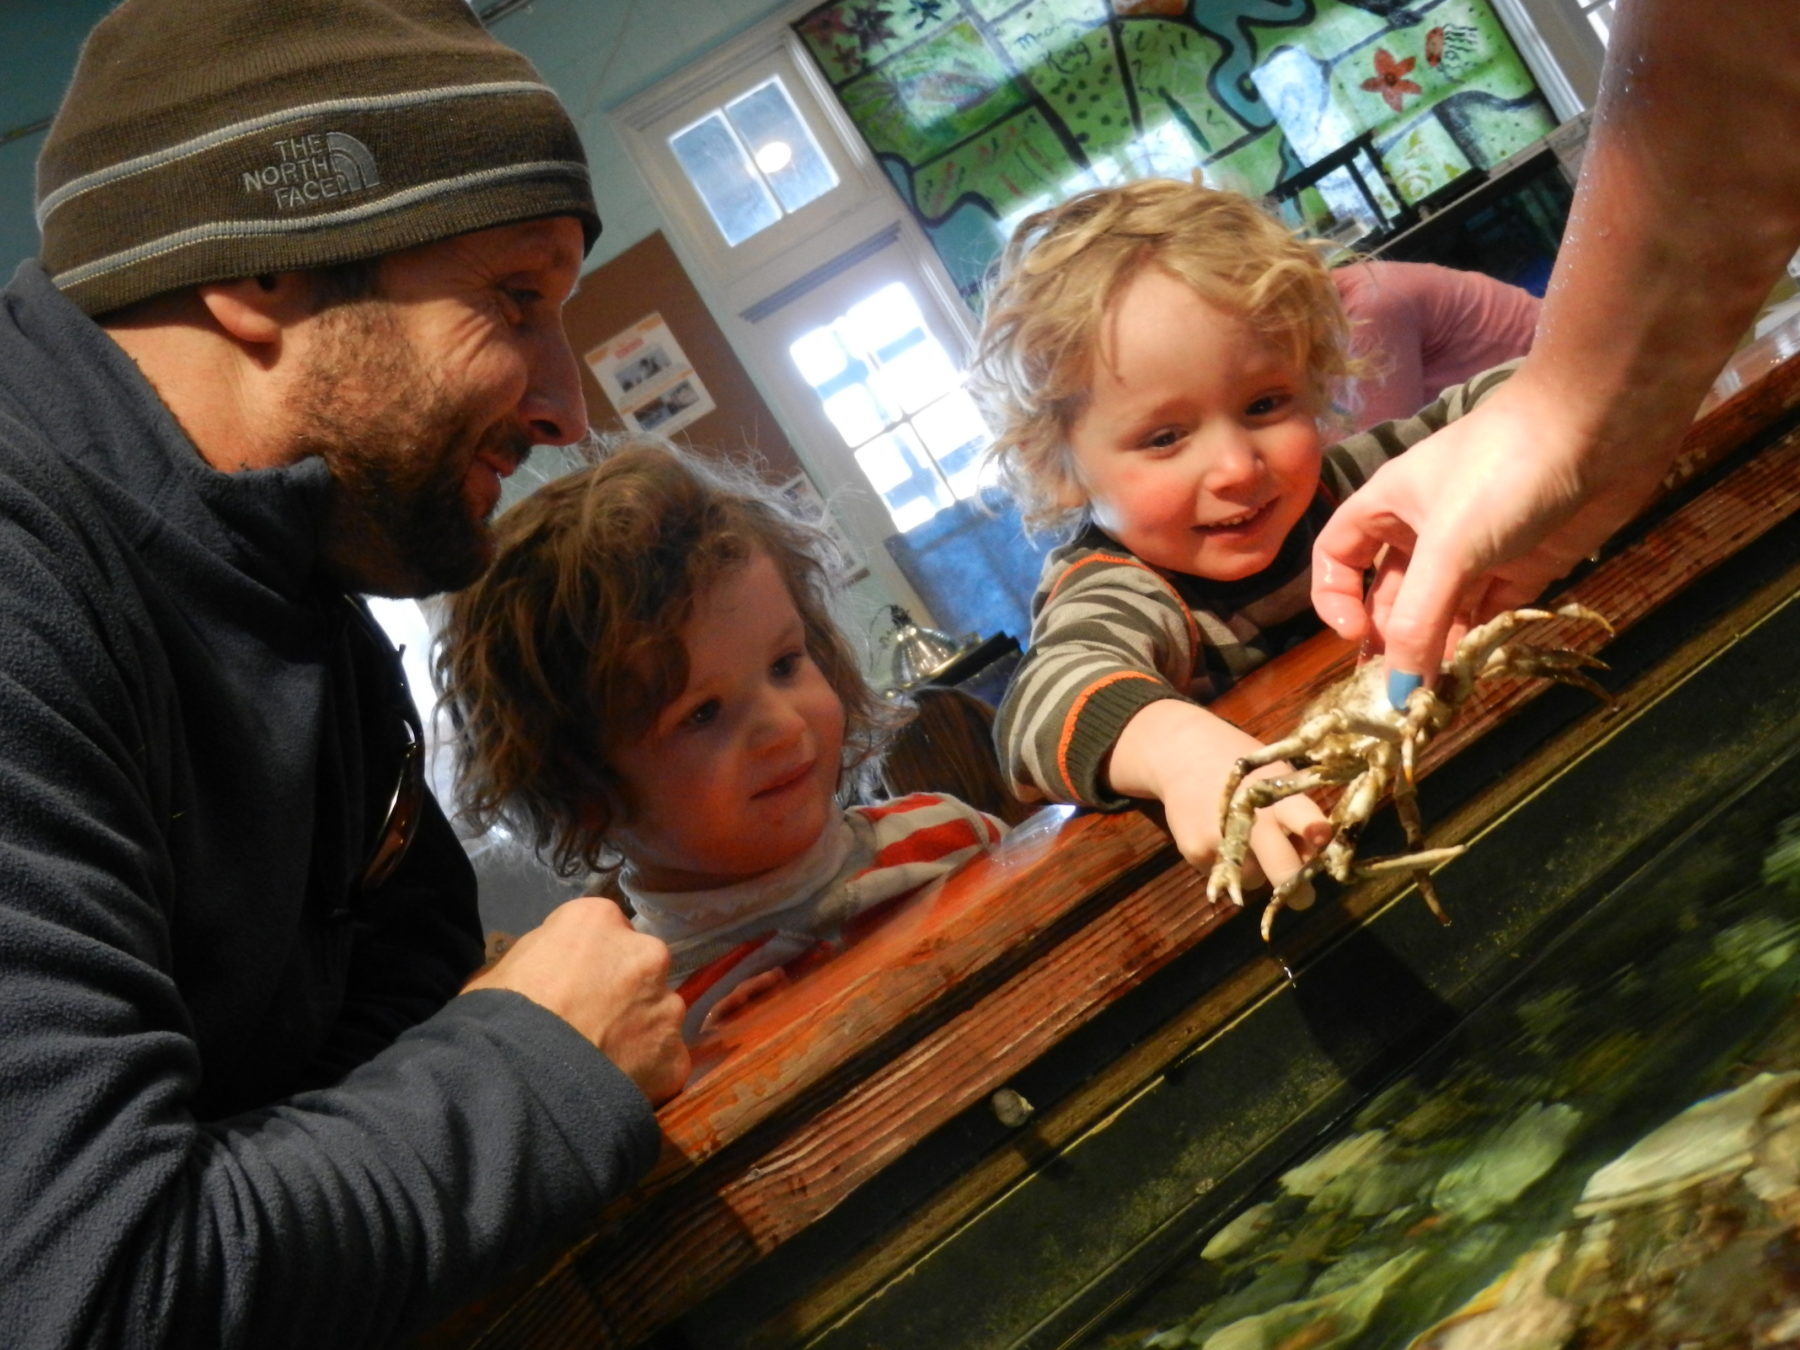 A dad and two kids at the Exploration Center and Aquarium